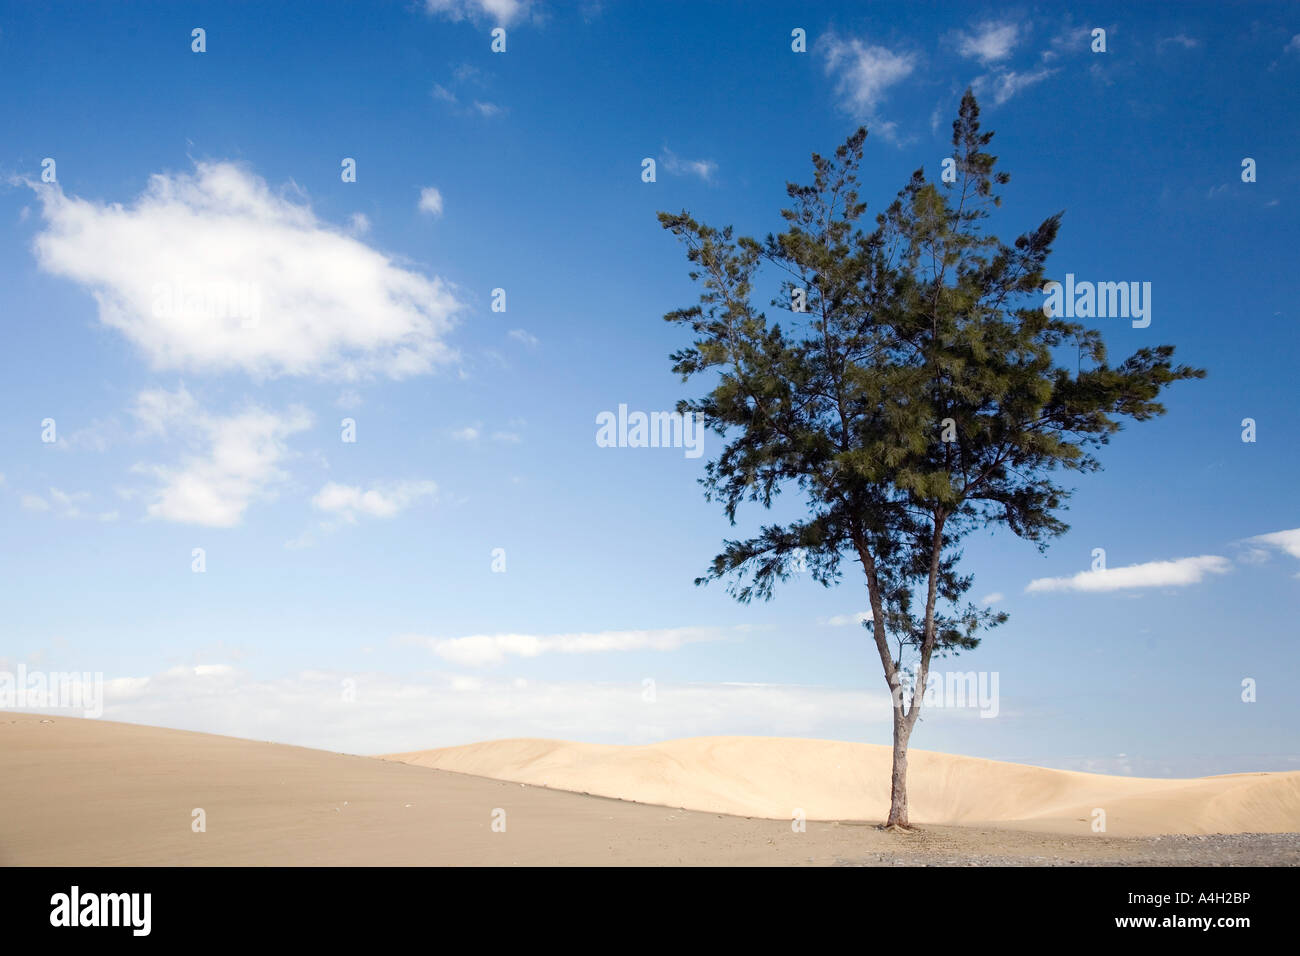 A lonely tree in the desert, Gran Canaria, Spain Stock Photo